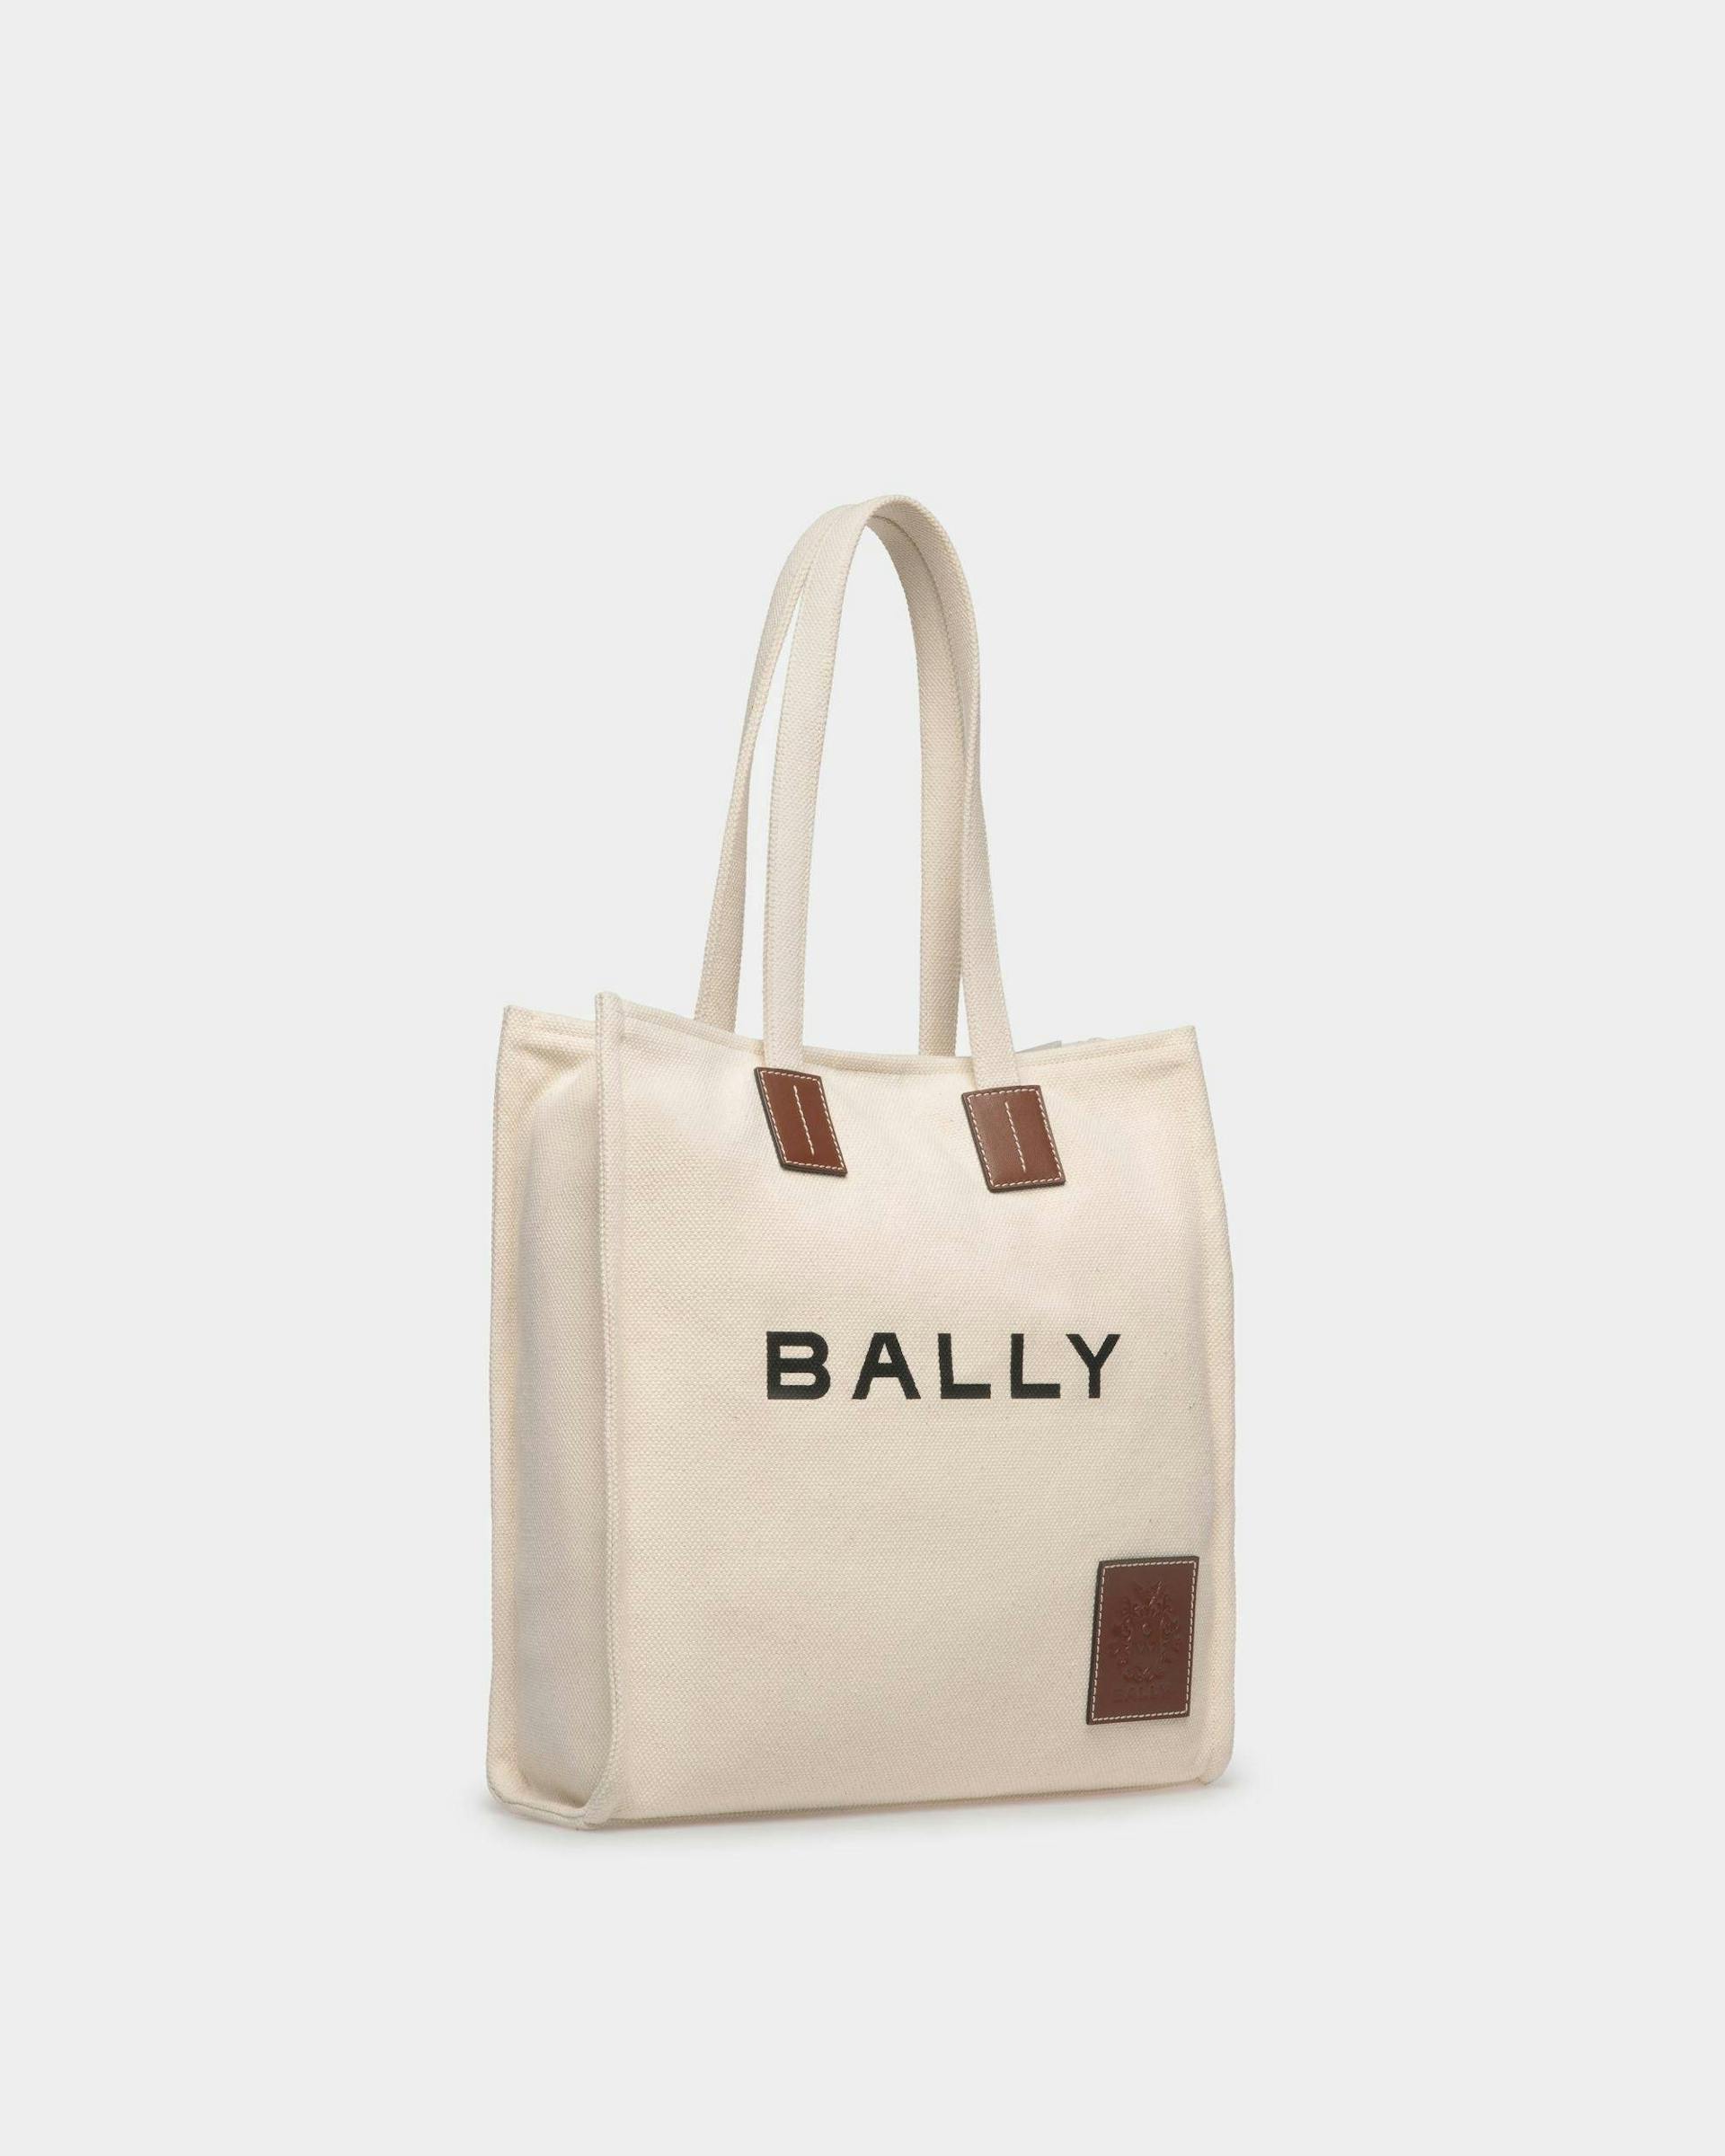 Women's Akelei Tote Bag in Canvas | Bally | Still Life 3/4 Front